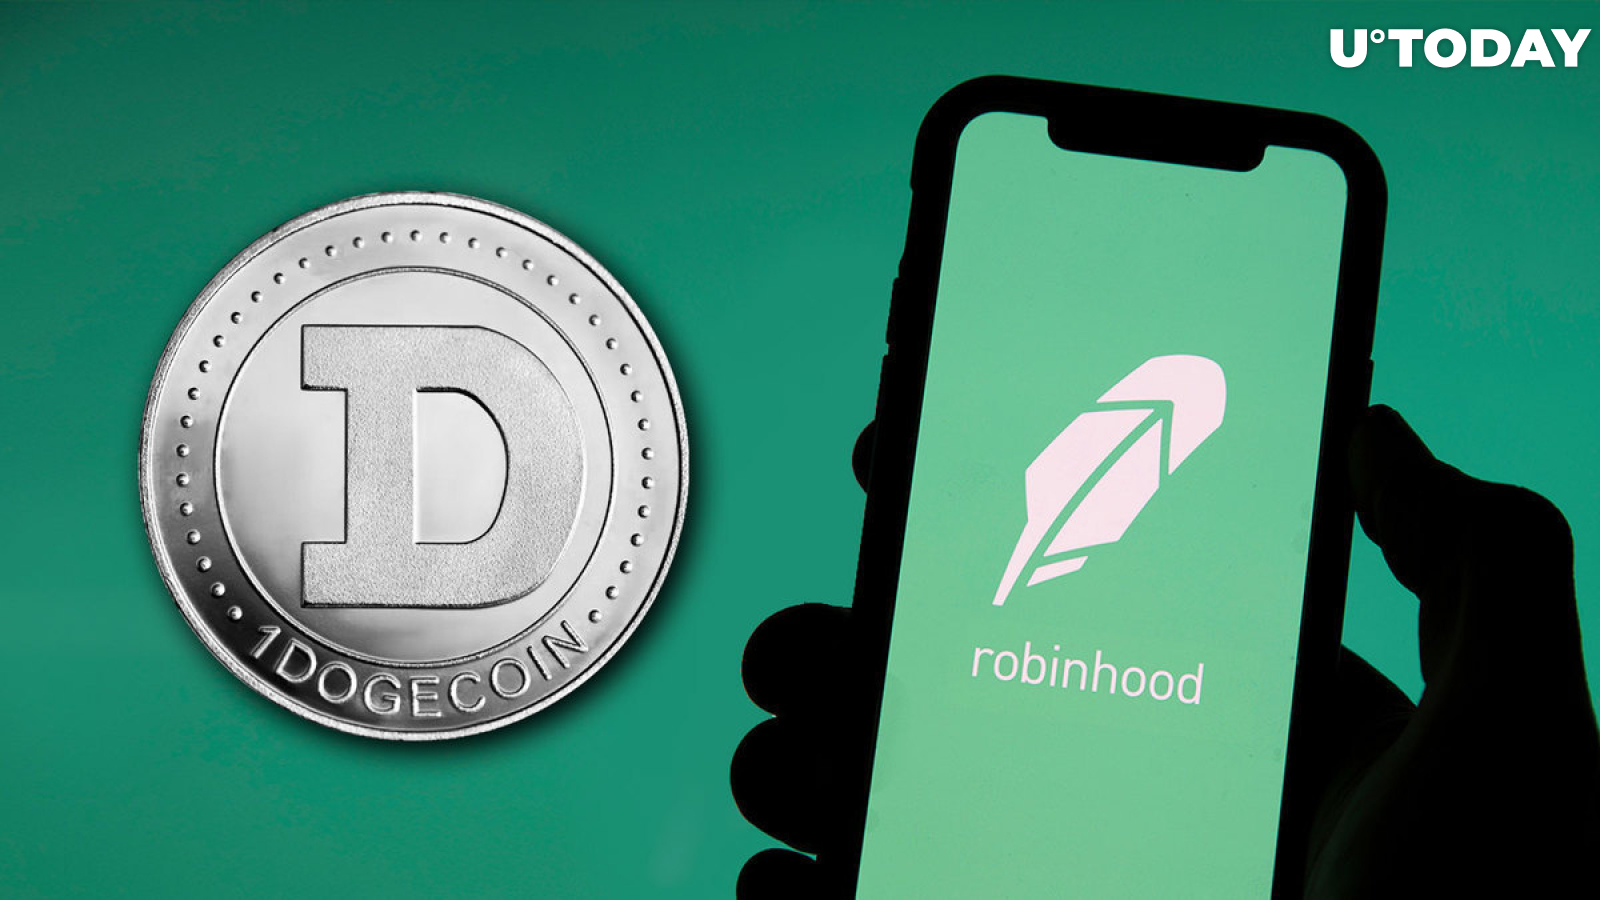 DOGE Price Up, While 340 Million Dogecoin Moved From Robinhood